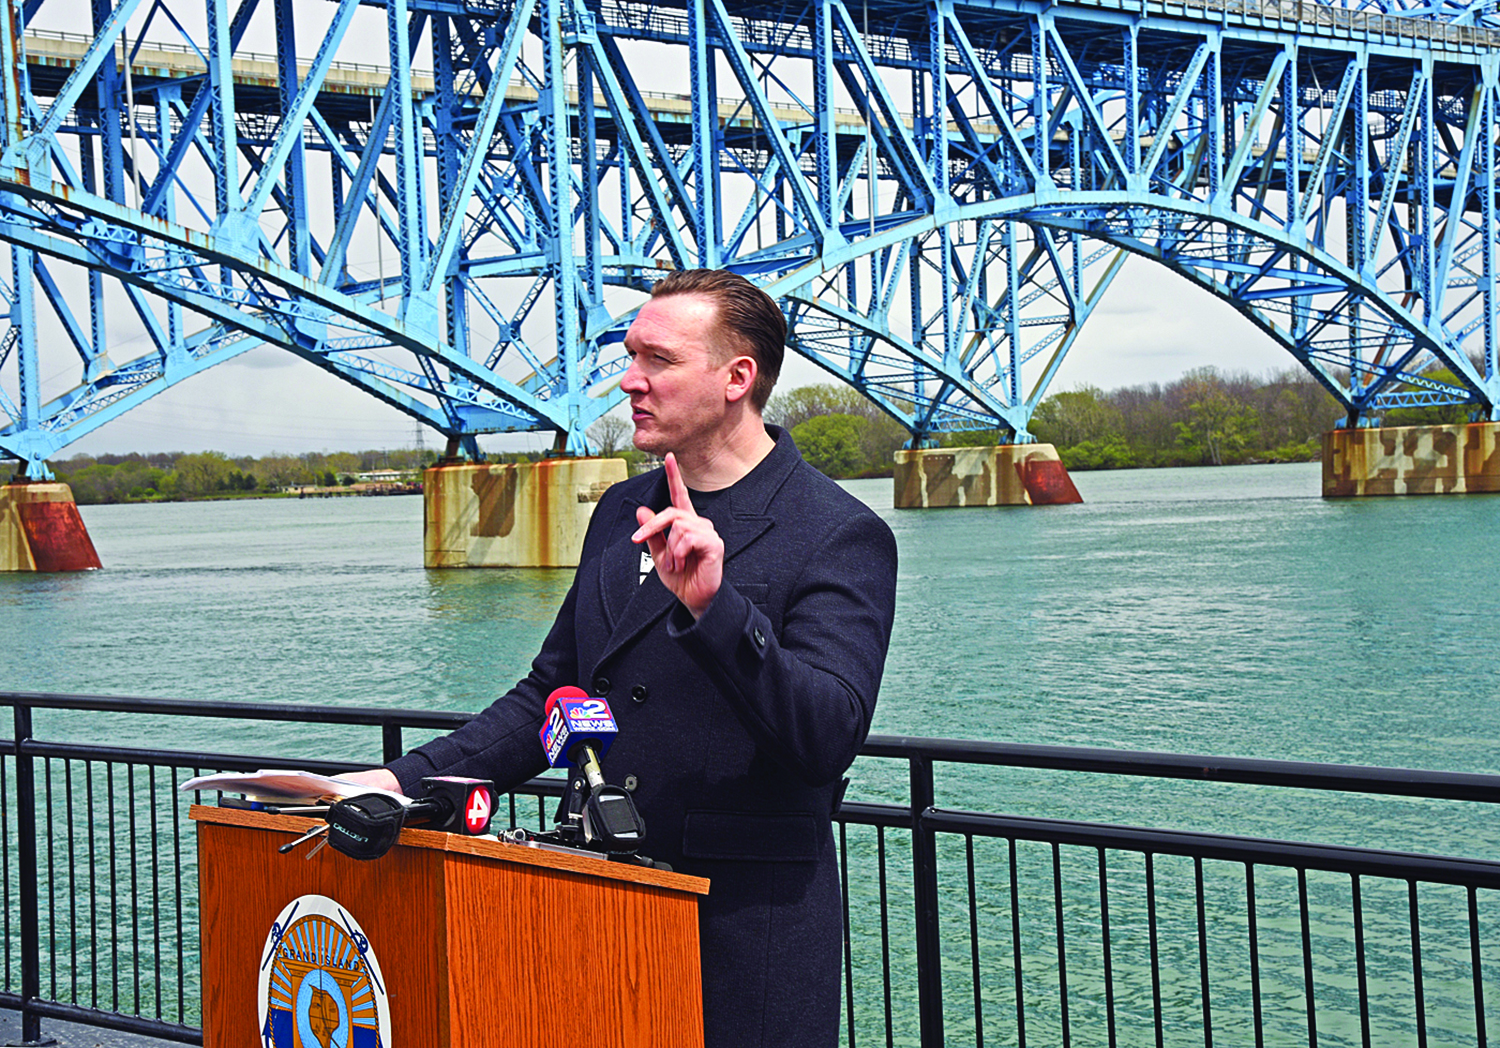 Grand Island Supervisor Nathan McMurray represents a sea change in the political will of the leadership of Grand Island. Unlike his predecessors, he wants the tolls removed. “Mr. Cuomo, tear down these tolls!” McMurray said at a rally attended by activist Rus Thompson.